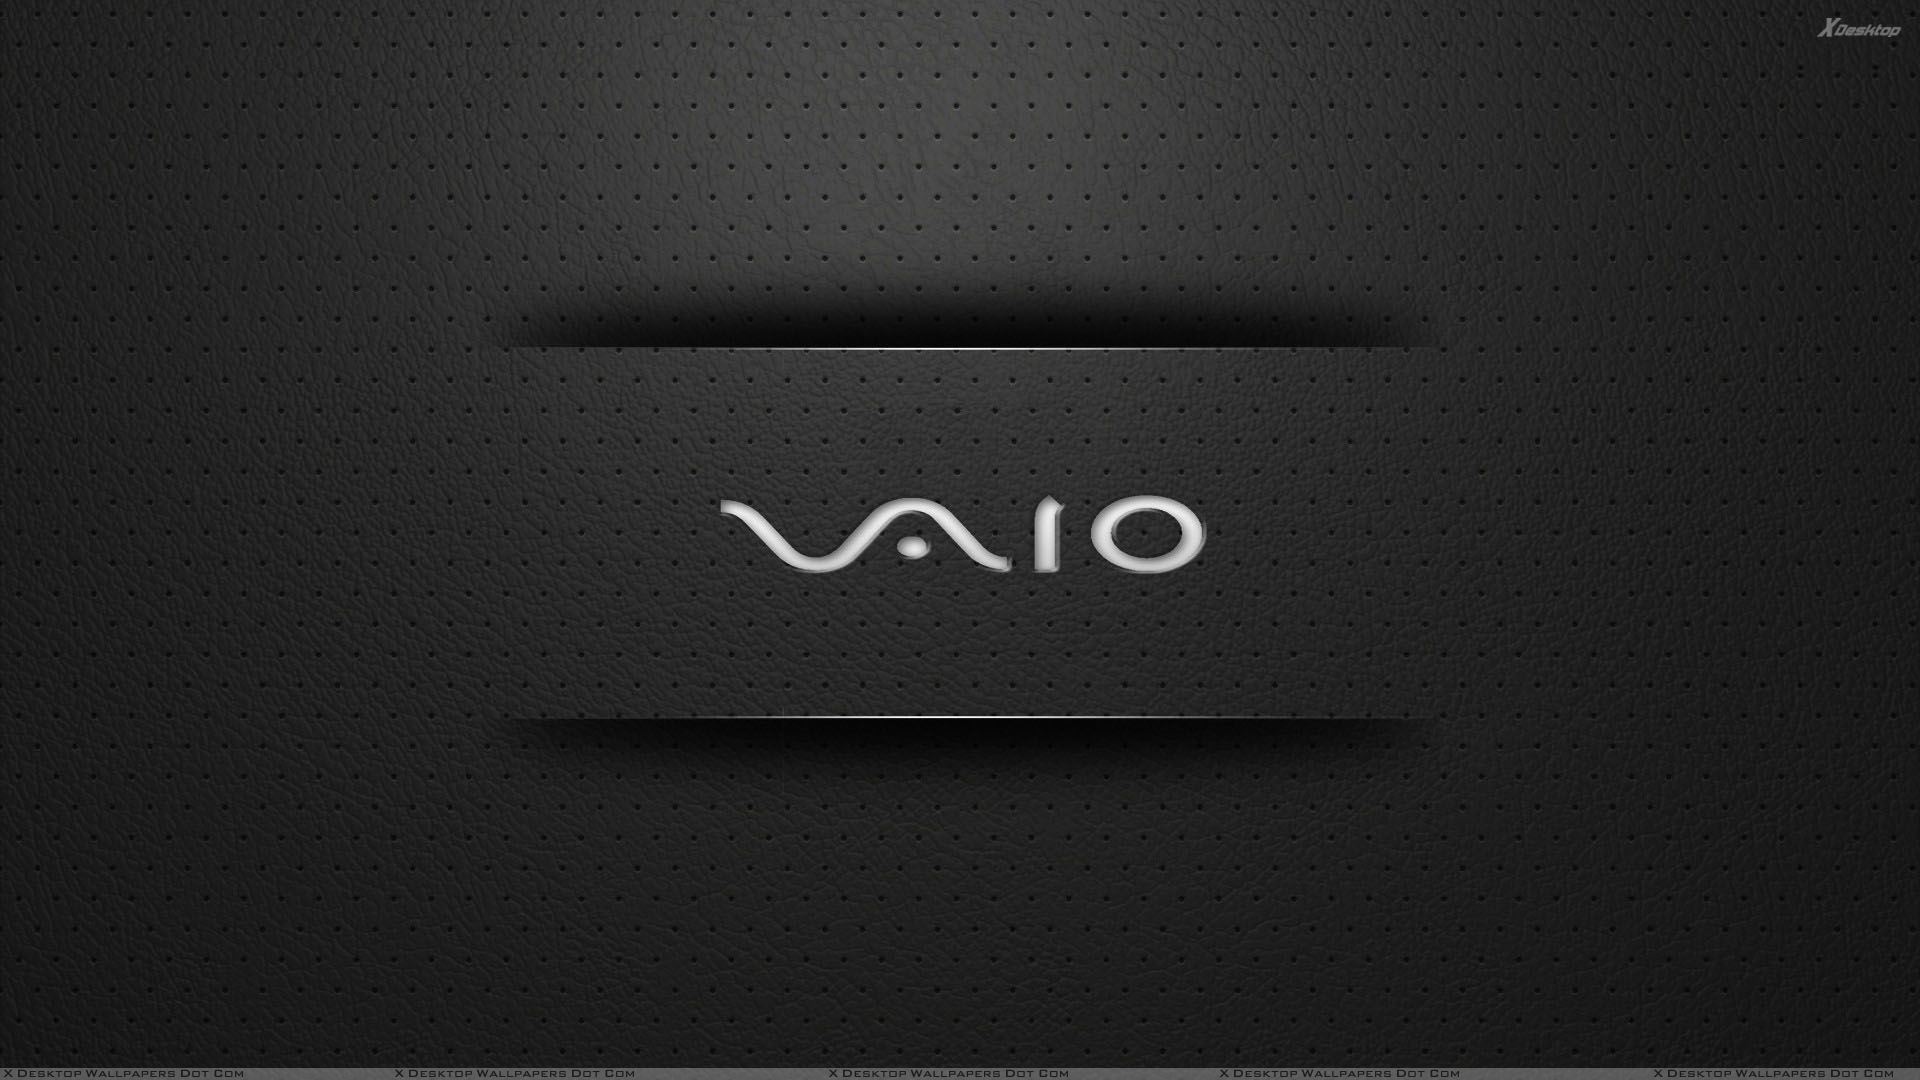 Sony Vaio Logo On Black Dotted Background Wallpaper